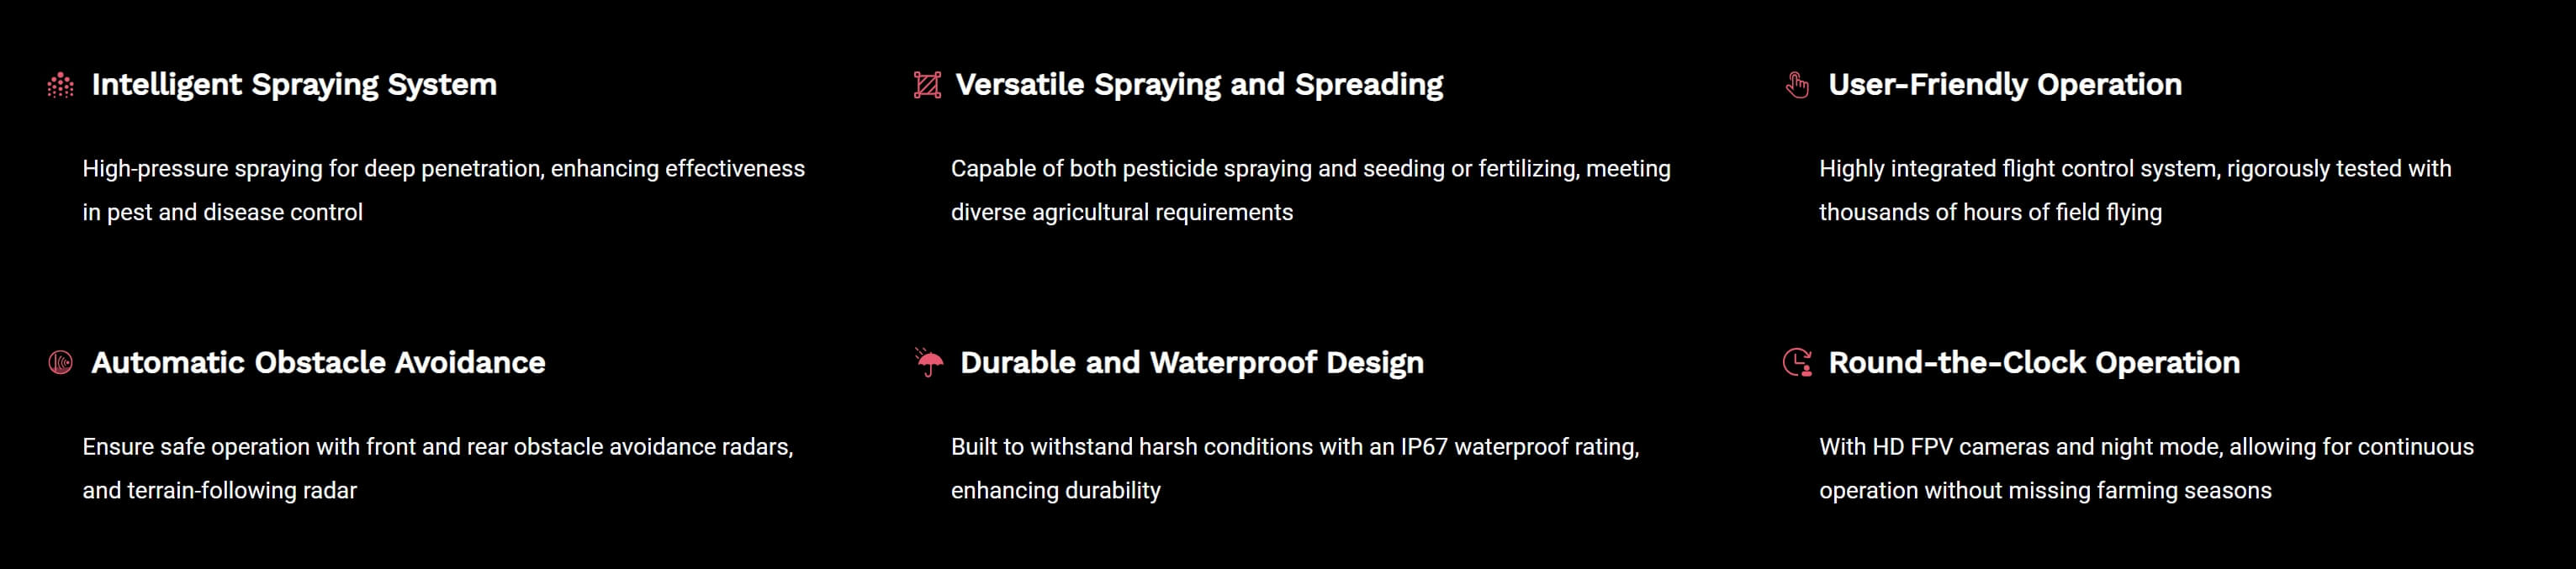 H32X Agriculture Drone, Intelligent Spraying System 1 Versatile Spraying and Spreading User-Friendly Operation